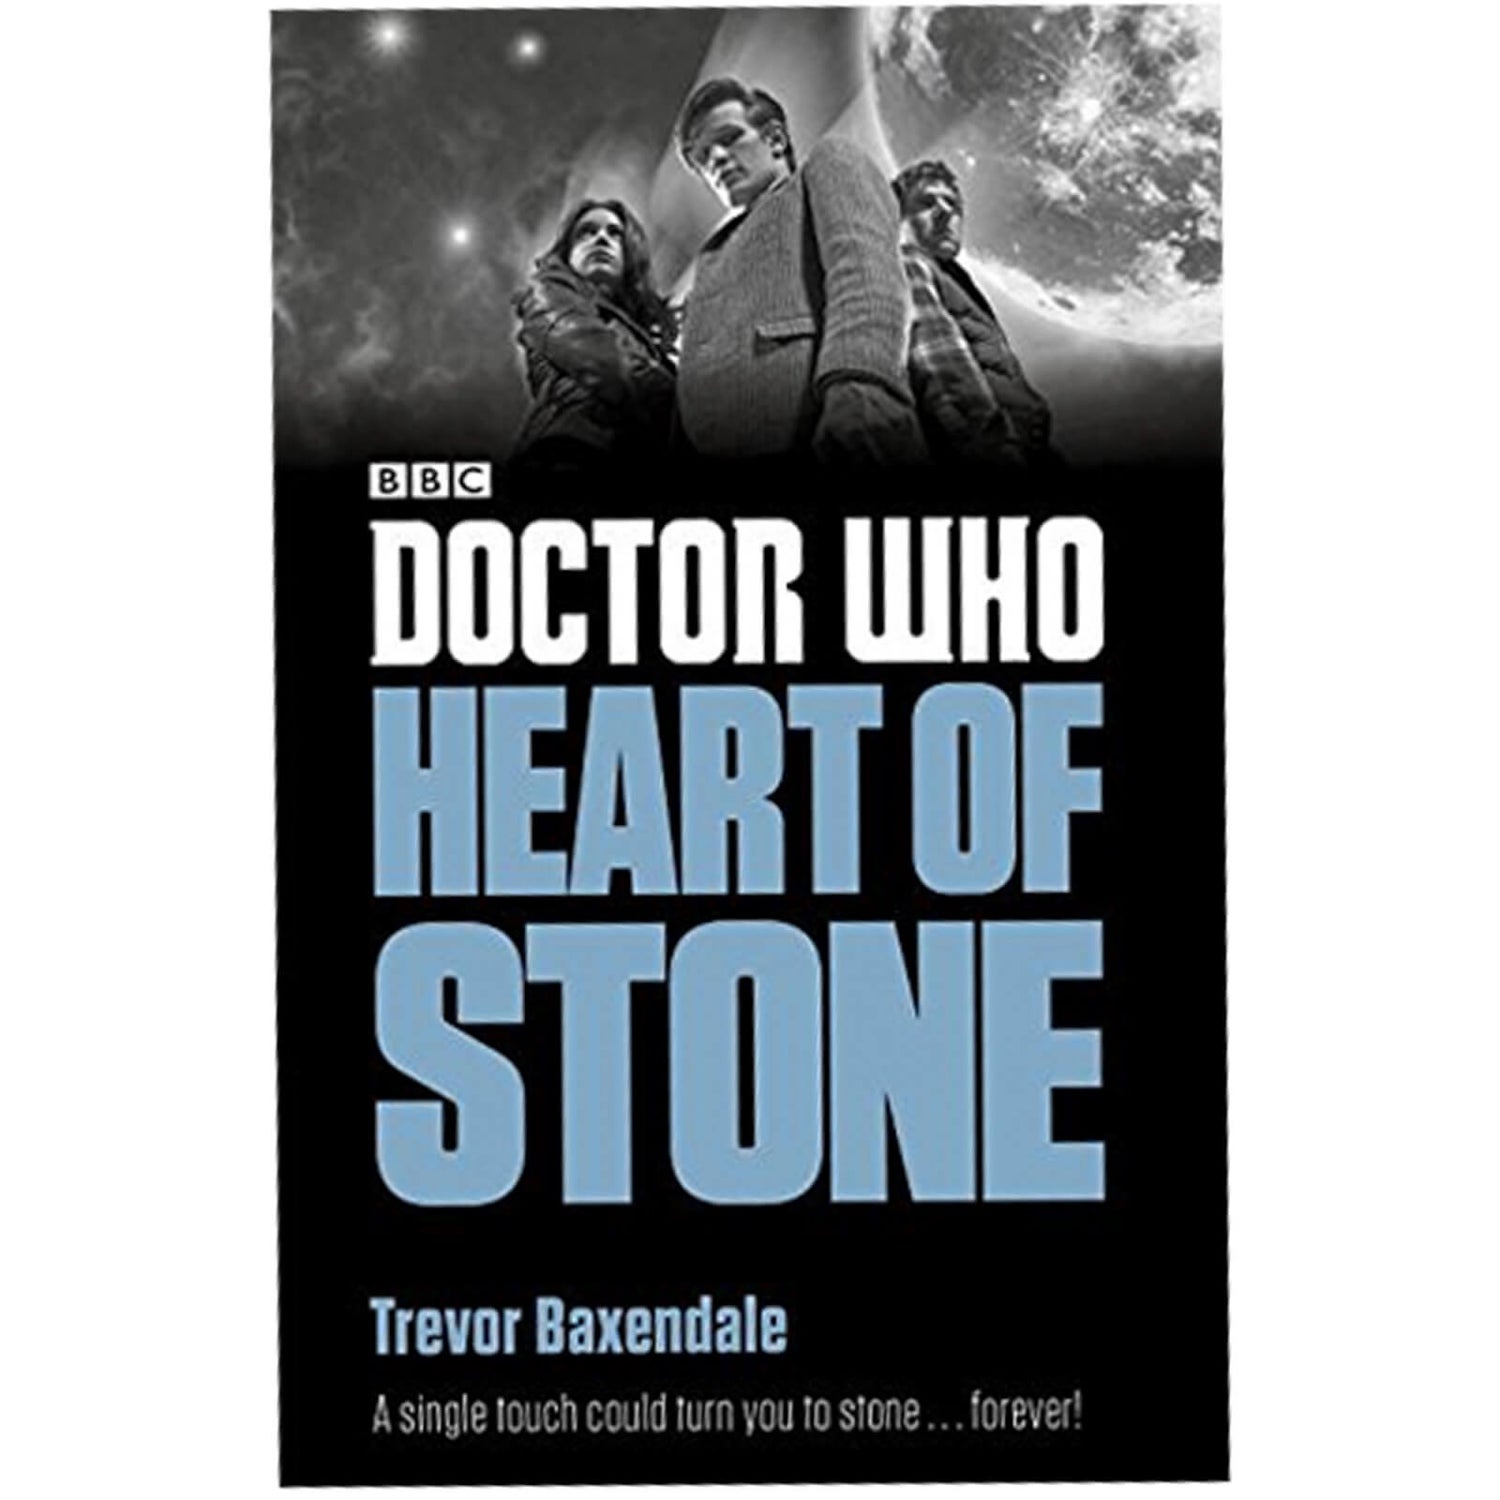 Doctor Who Heart Of Stone Graphic Novel